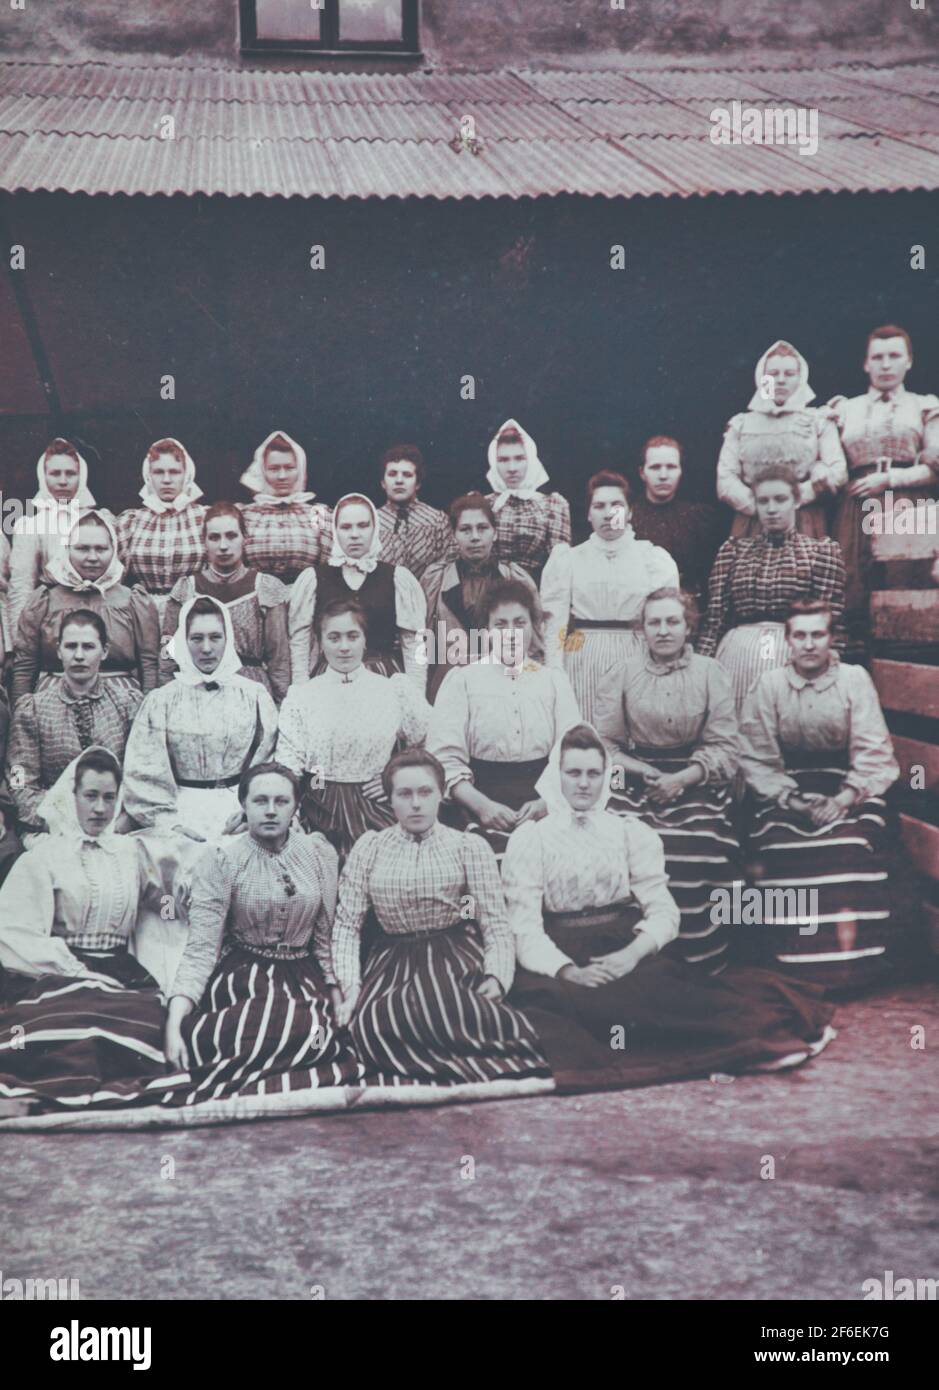 Authentic vintage photograph of group of female Swedish workers 1925 Stockholm, Sweden, Concept of teamwork, togetherness Stock Photo